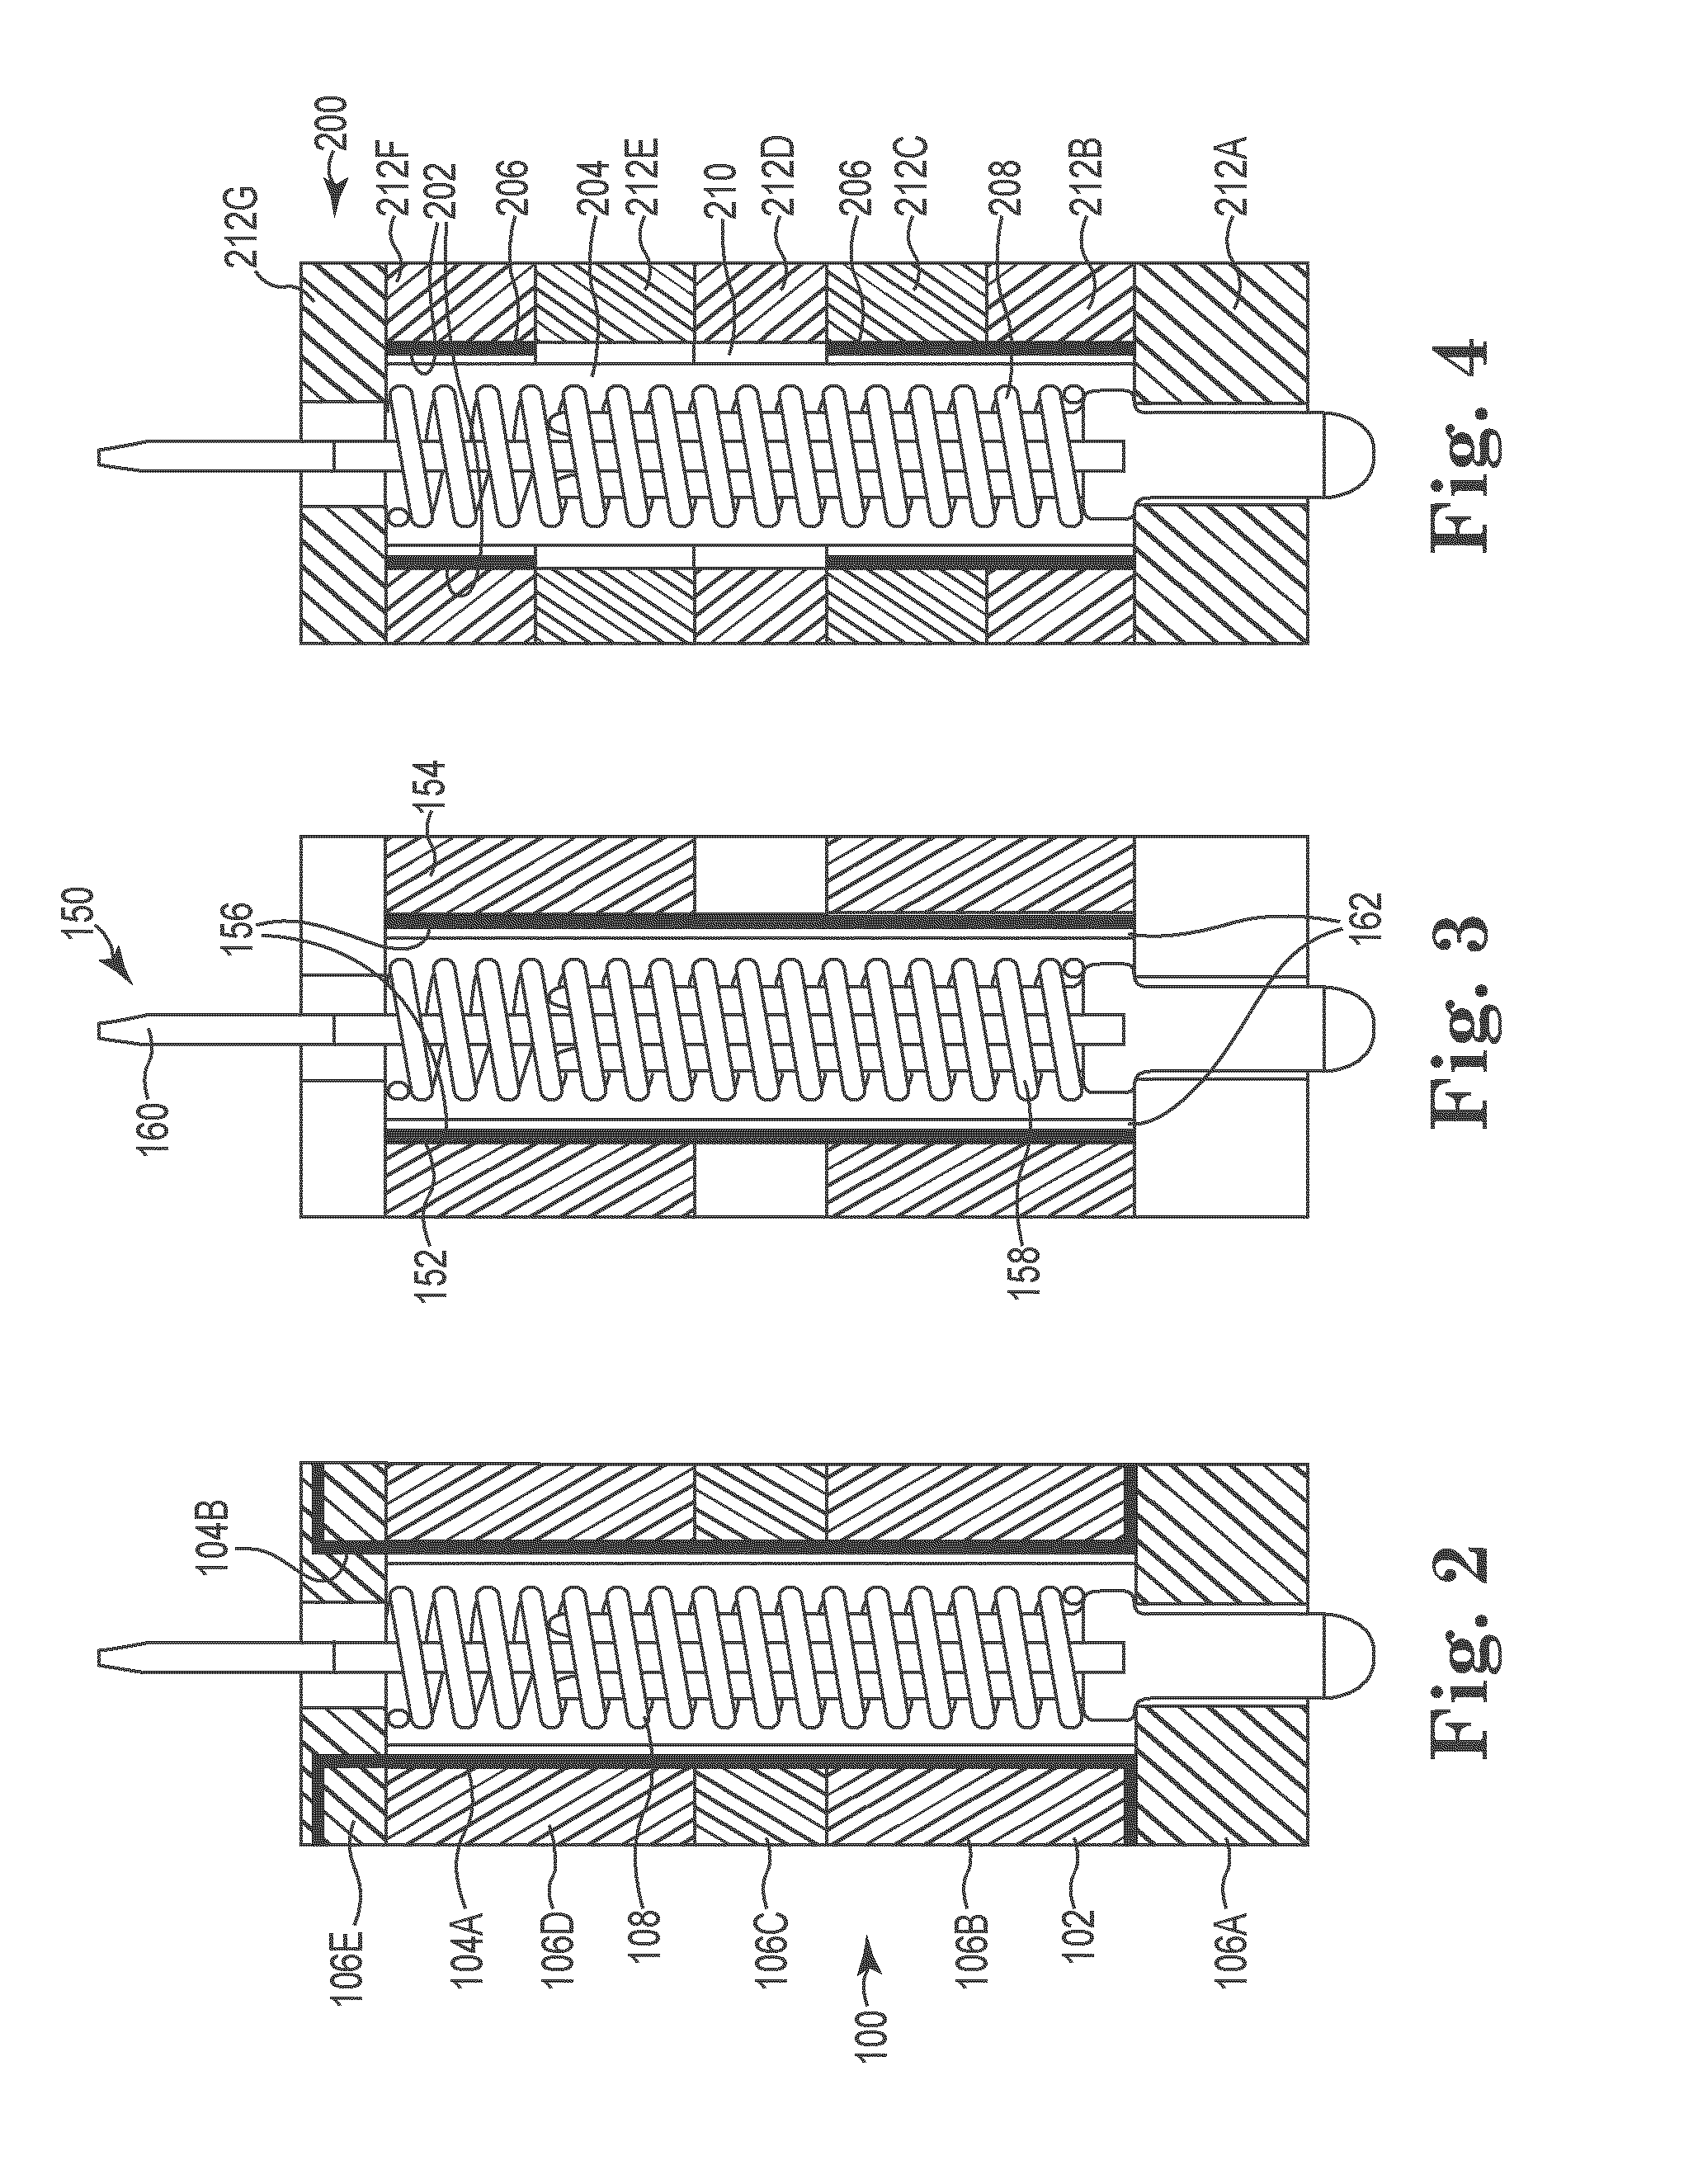 Selective metalization of electrical connector or socket housing